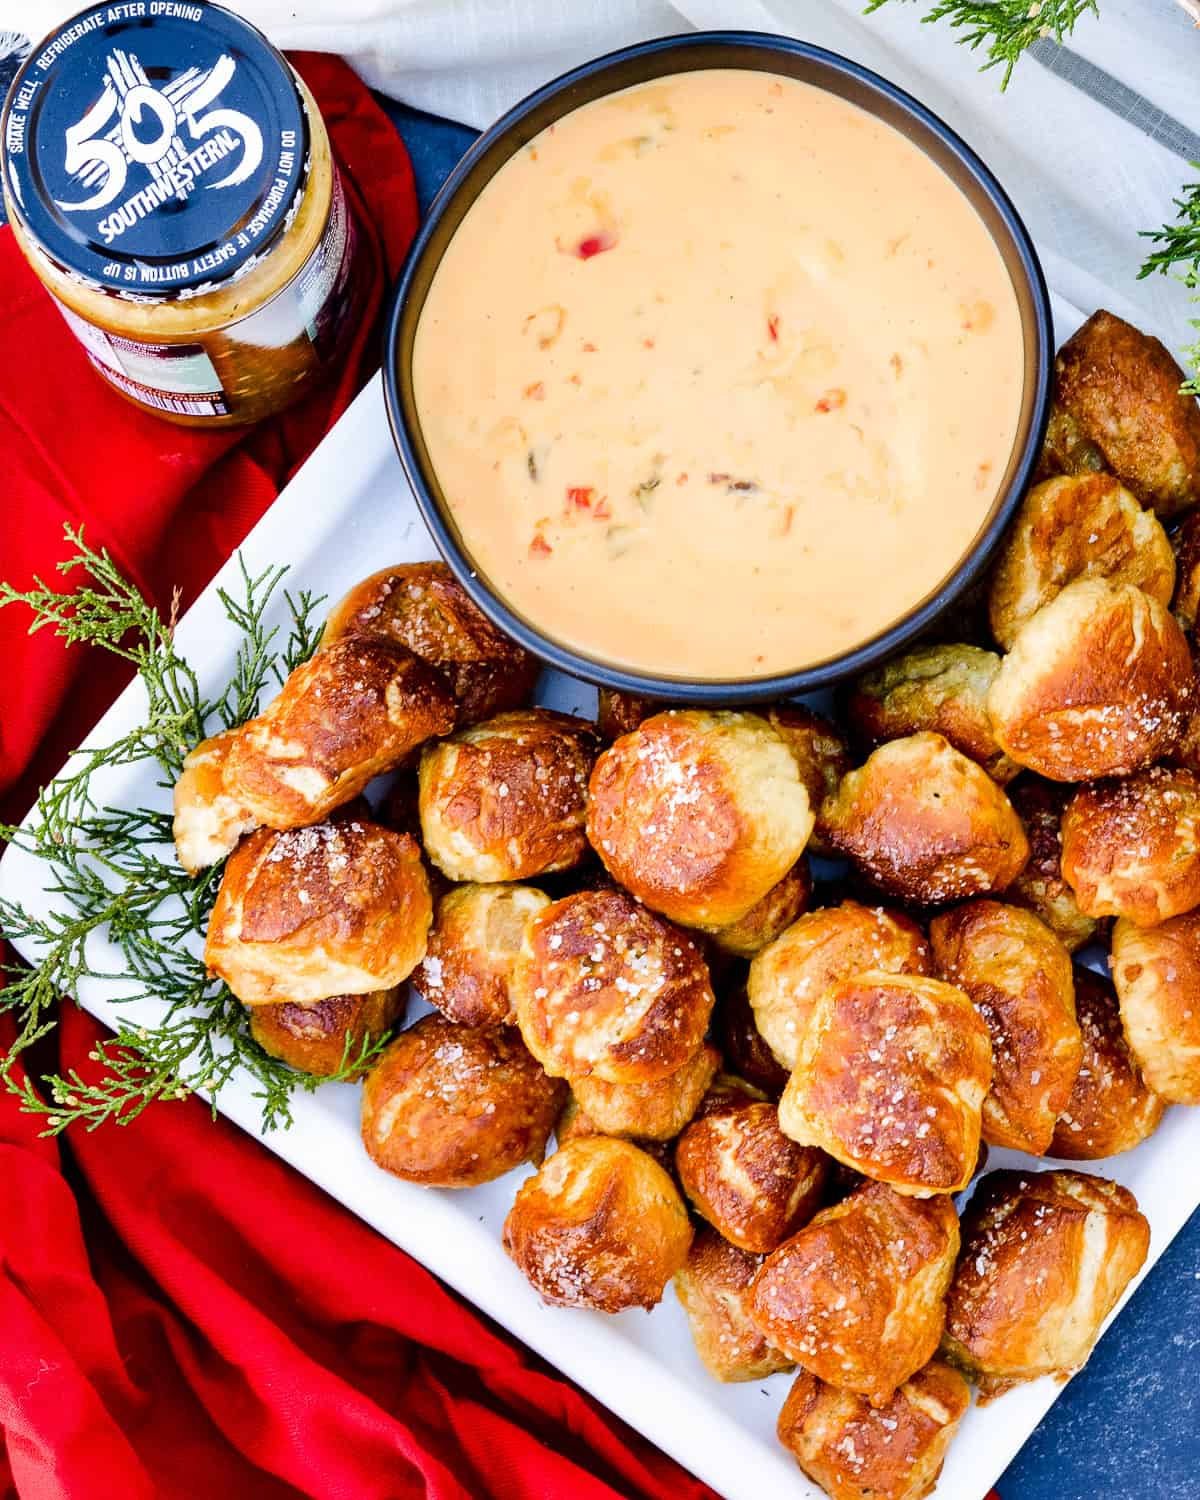 Pretzel bites with red and queso.